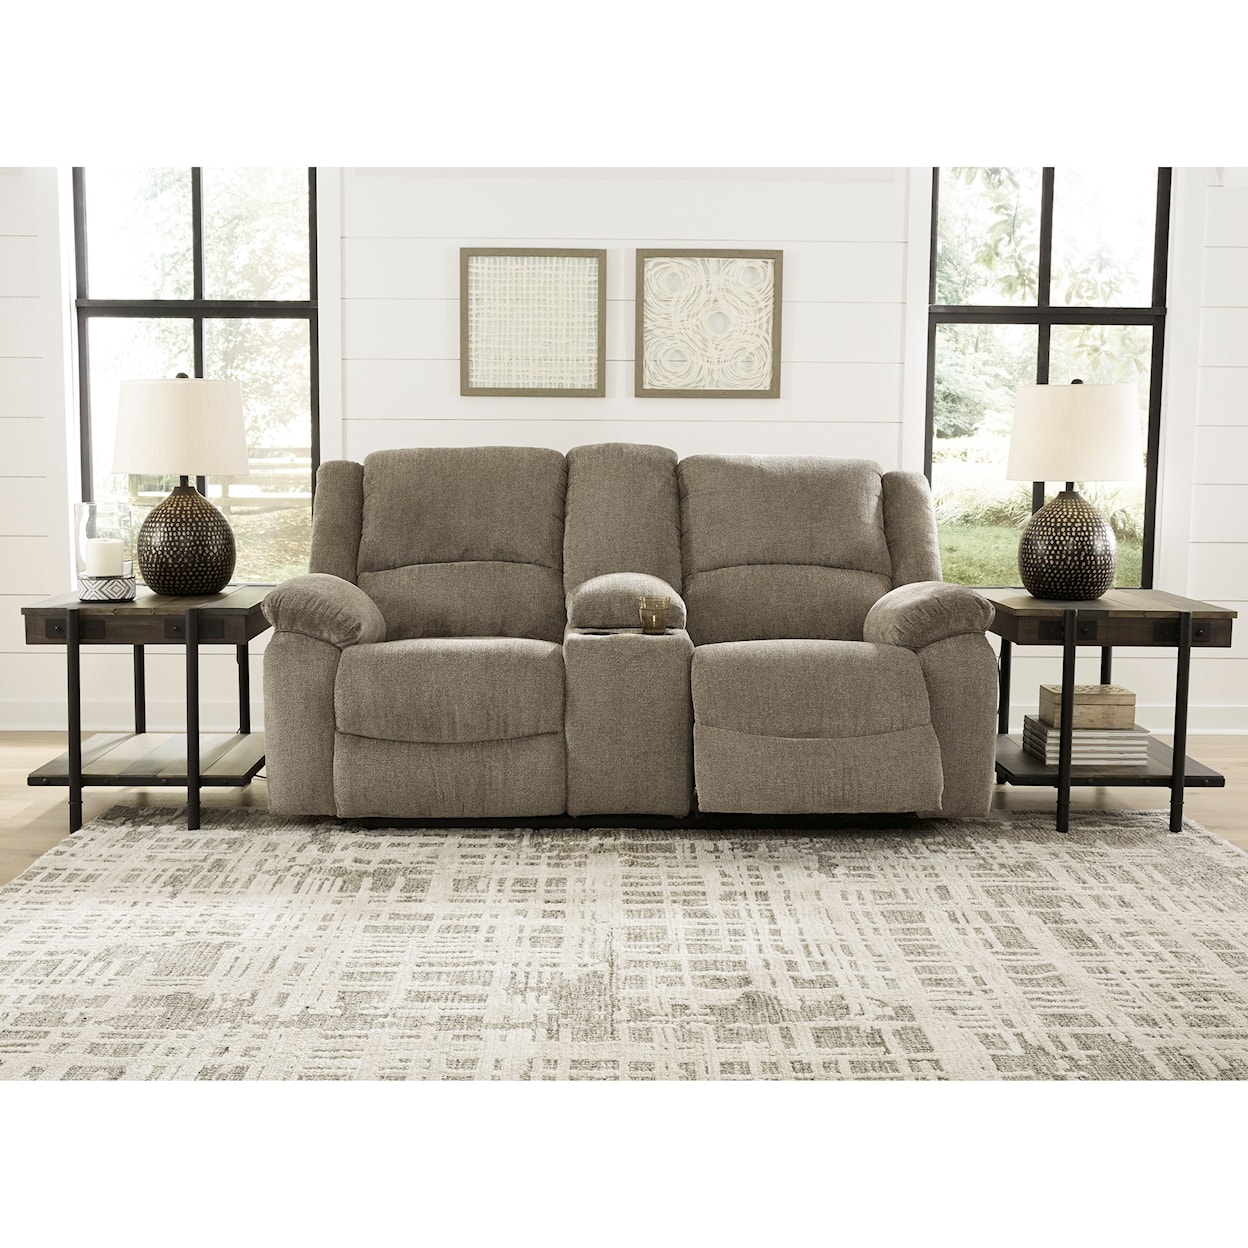 Ashley Furniture Signature Design Draycoll Double Reclining Loveseat w/ Console